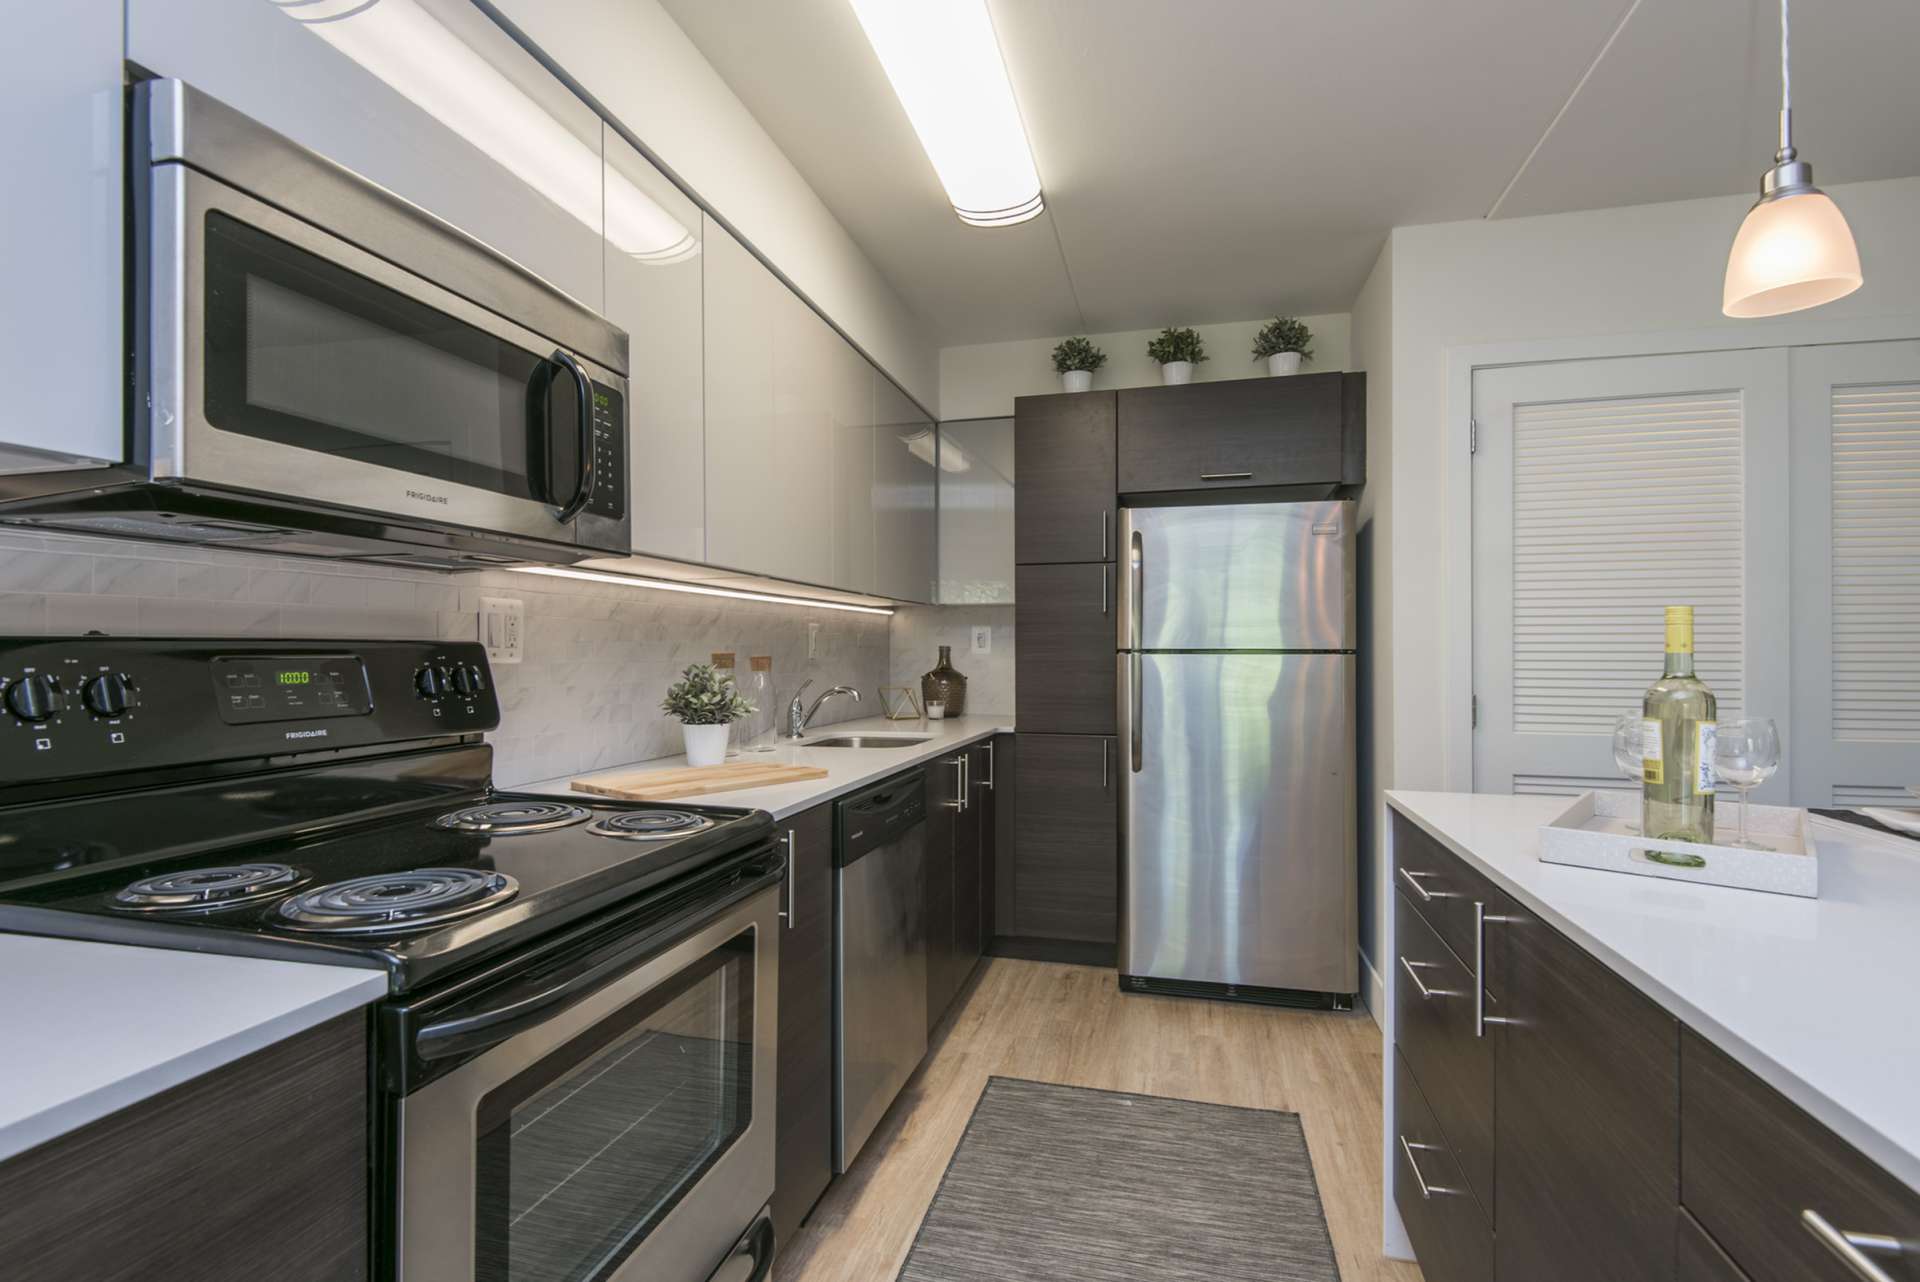 Kitchen with stainless steel appliances, hanging lights, and plenty of cabinet space.